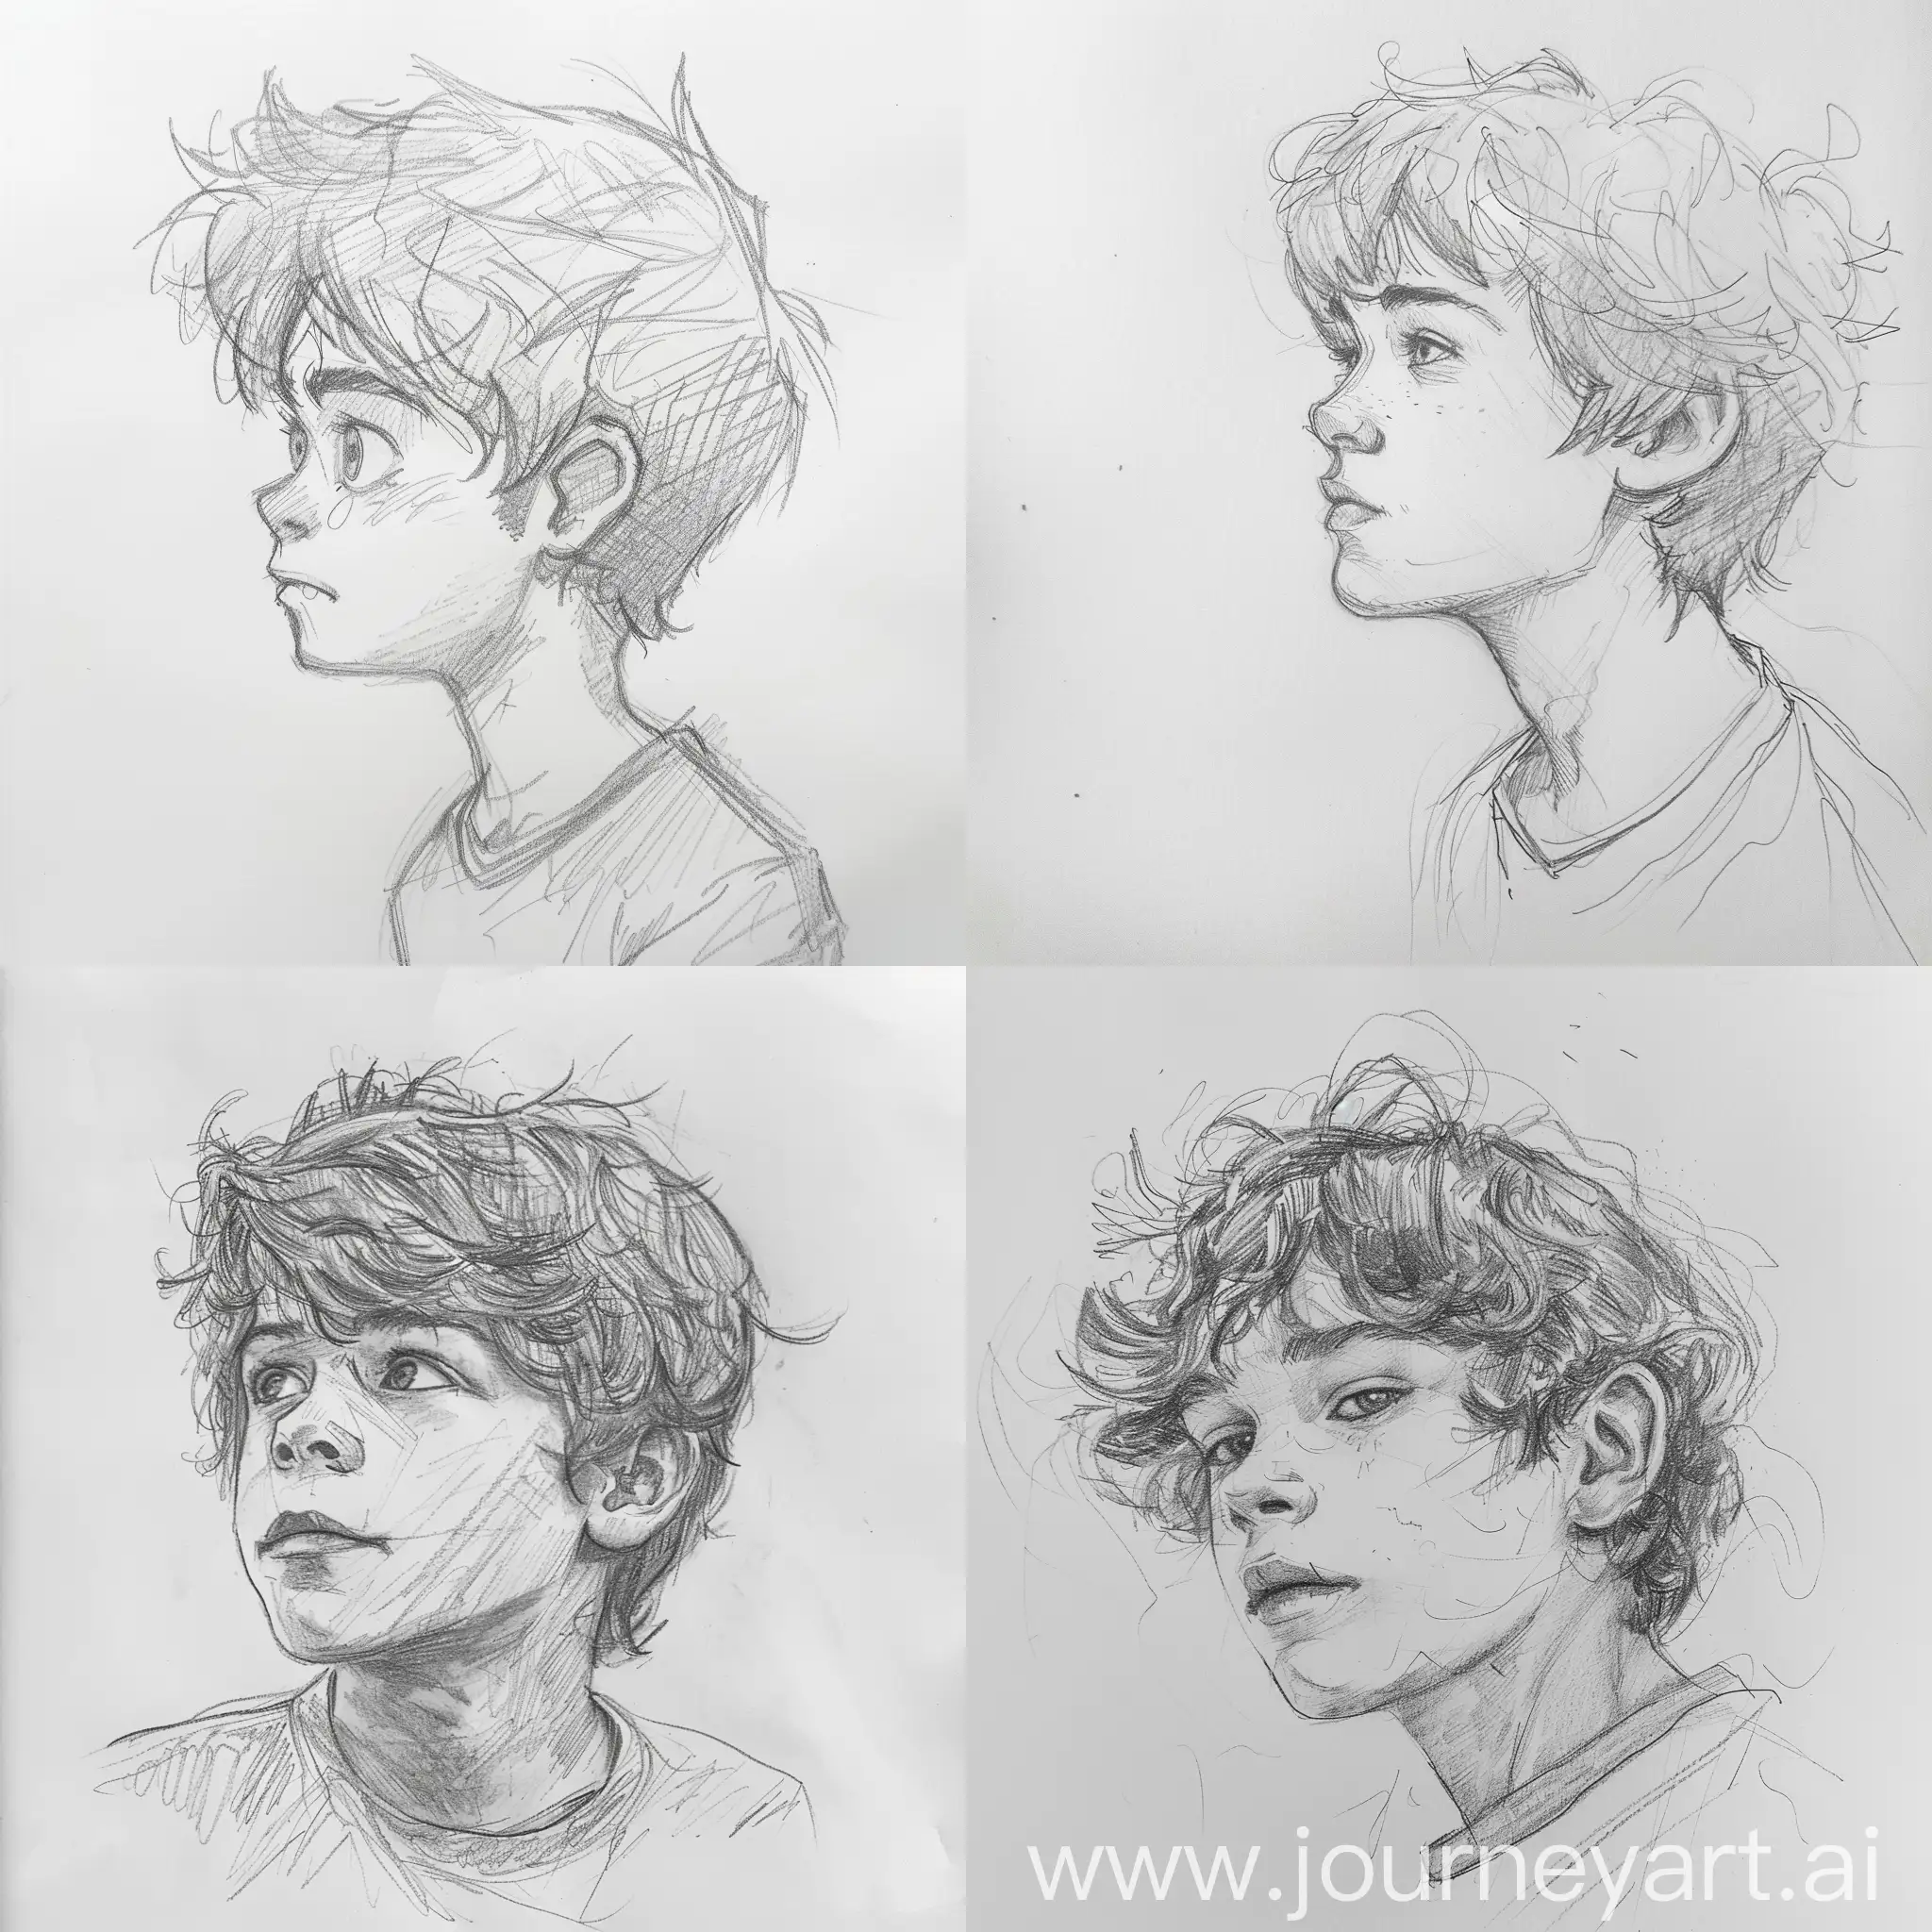 make a pencil sketch of a boy. background white, position left side of the pic, the boy has scattered hair